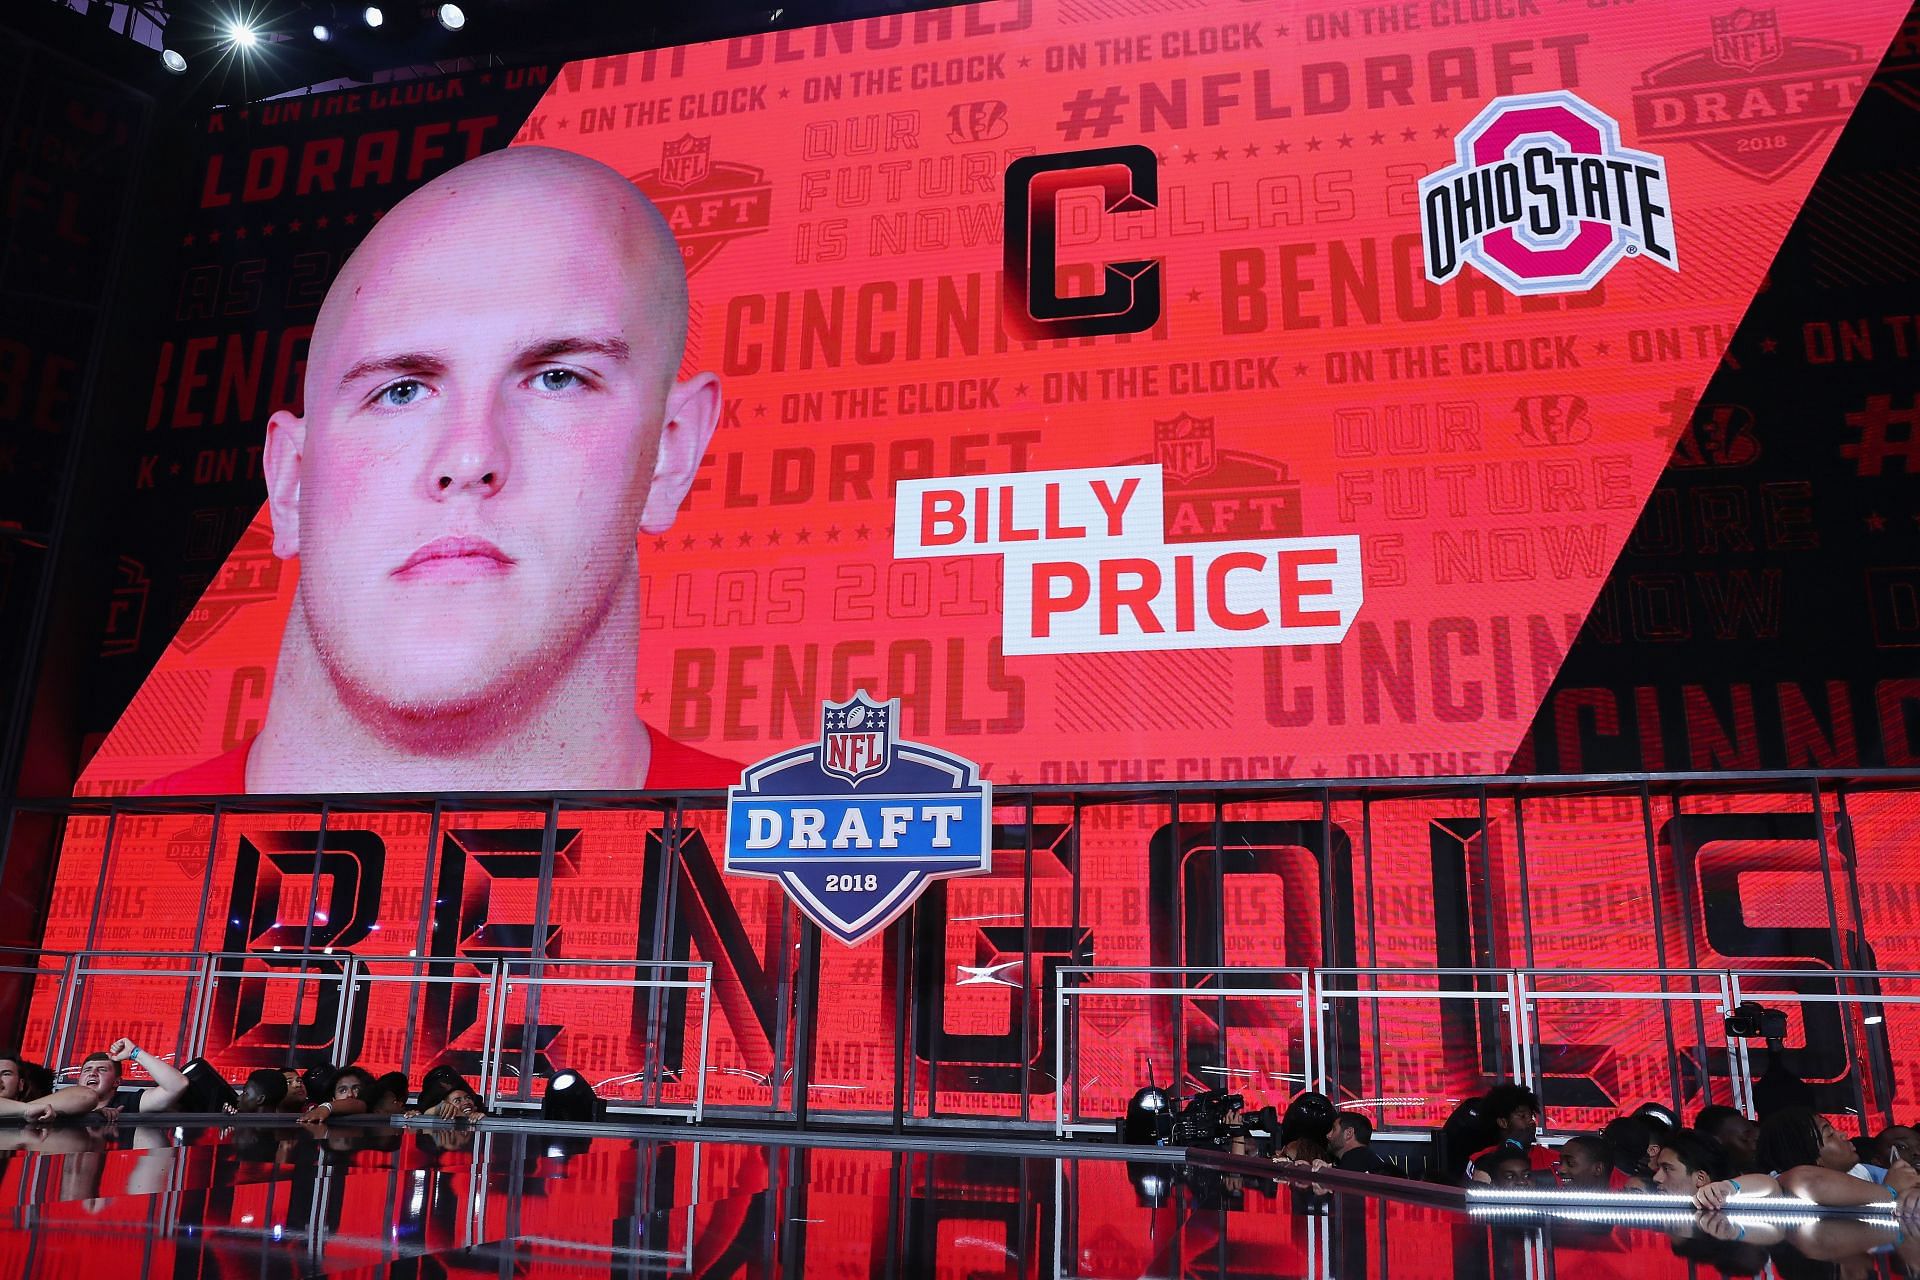 Billy Price selected at the 2018 NFL Draft